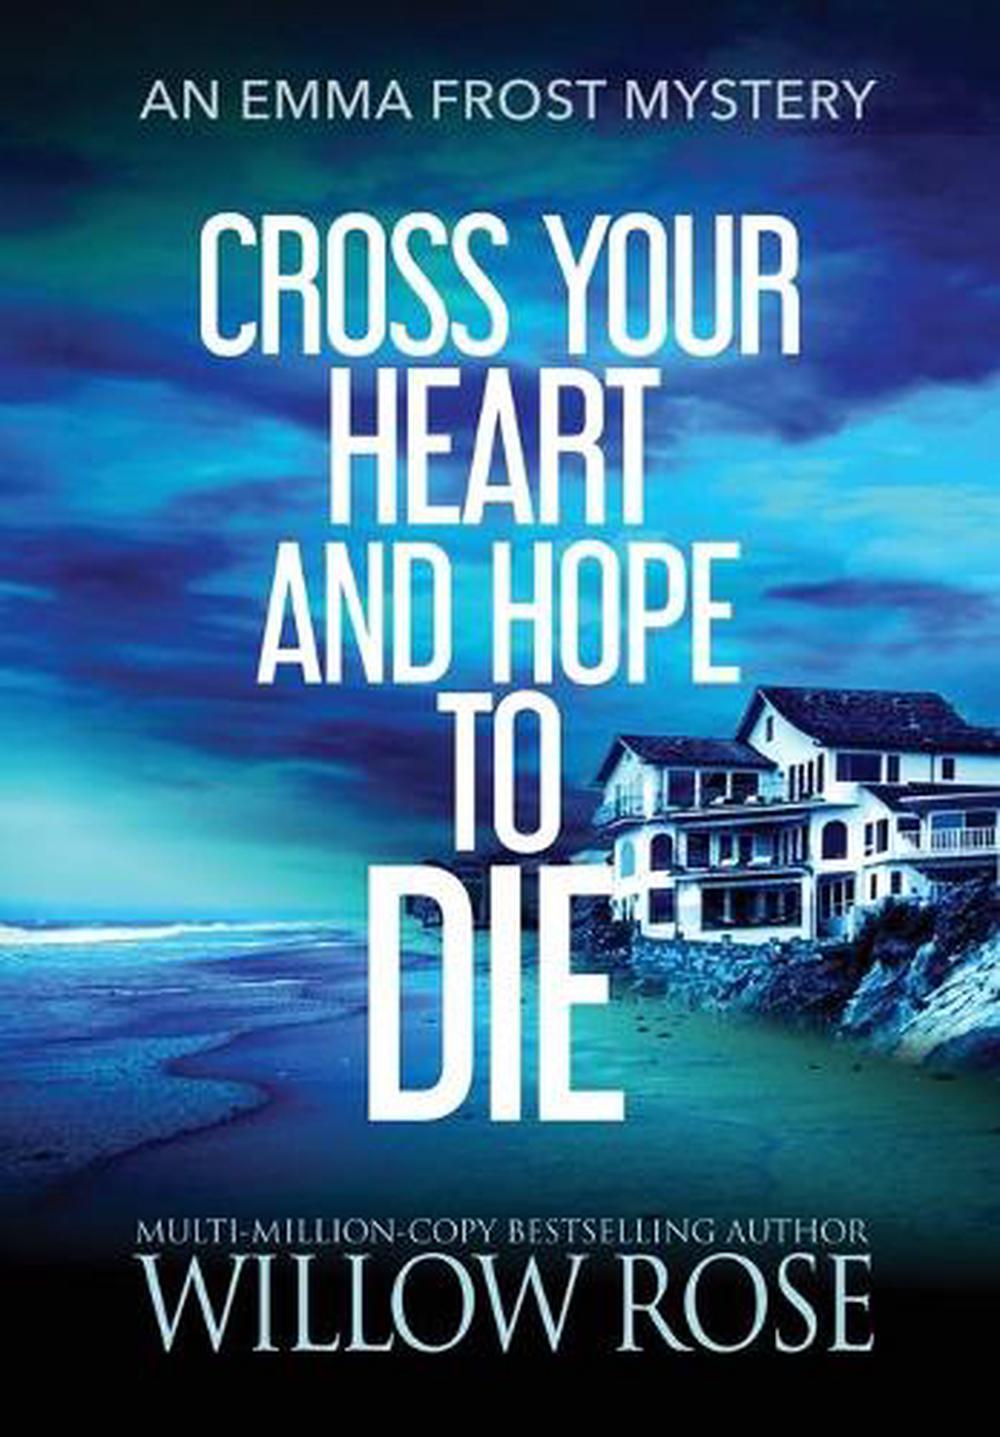 Cross Your Heart and Hope to Die by Willow Rose (English) Hardcover ...